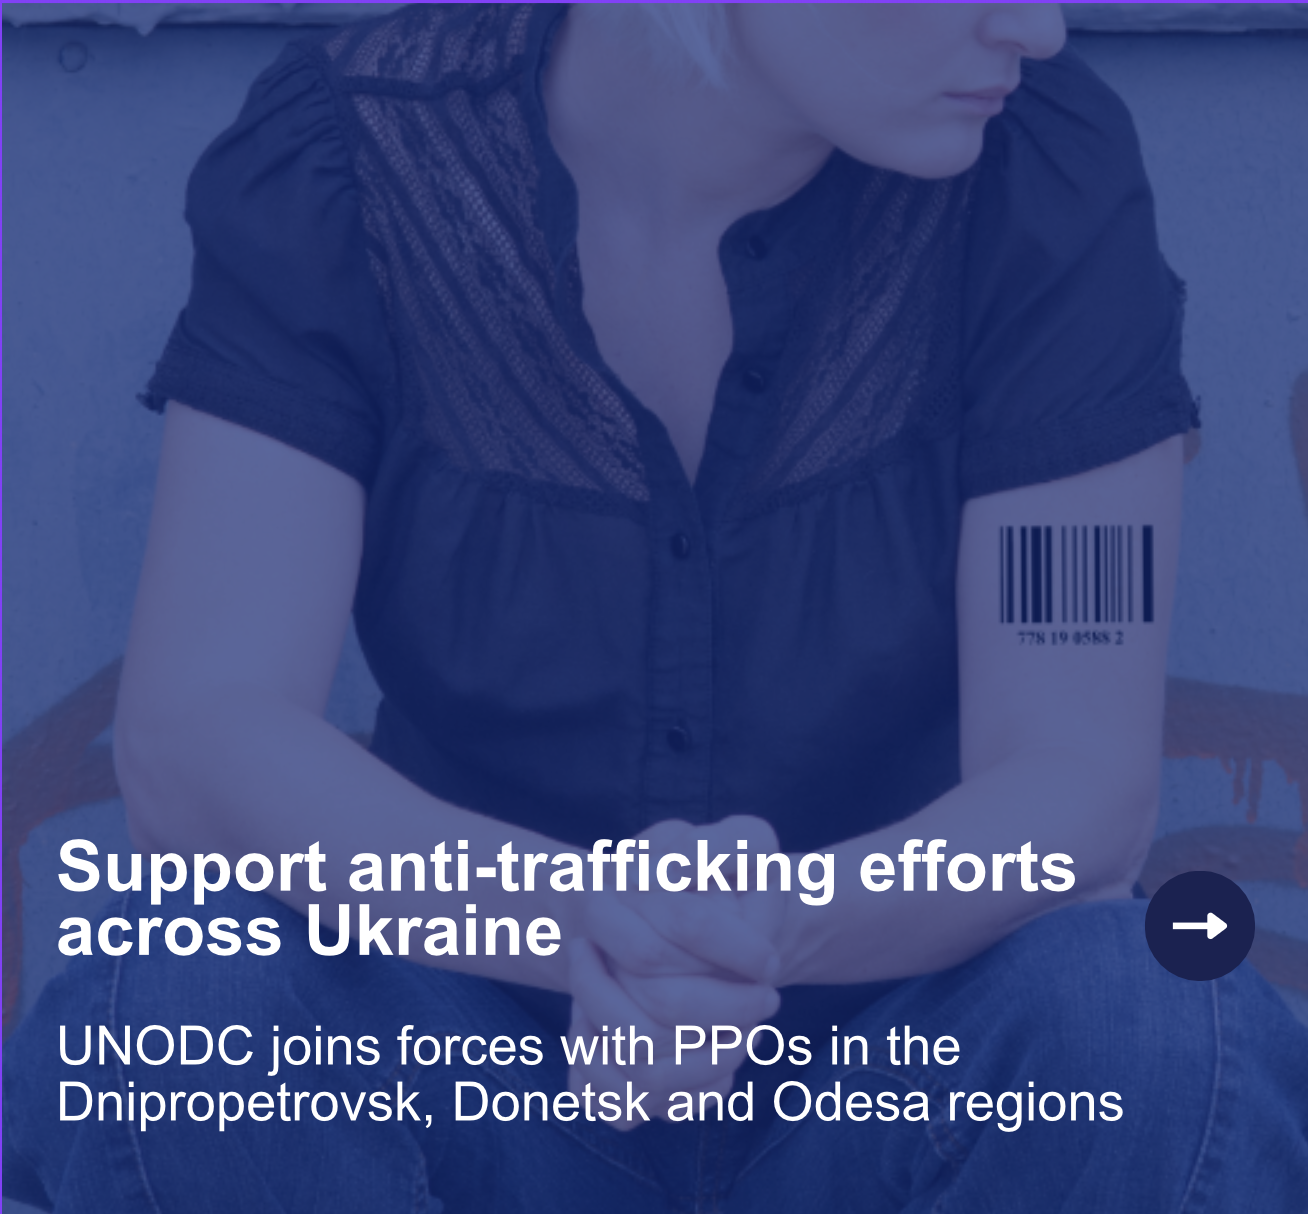 Webstory: UNODC joins forces with PPOs in the Dnipropetrovsk, Donetsk and Odesa regions